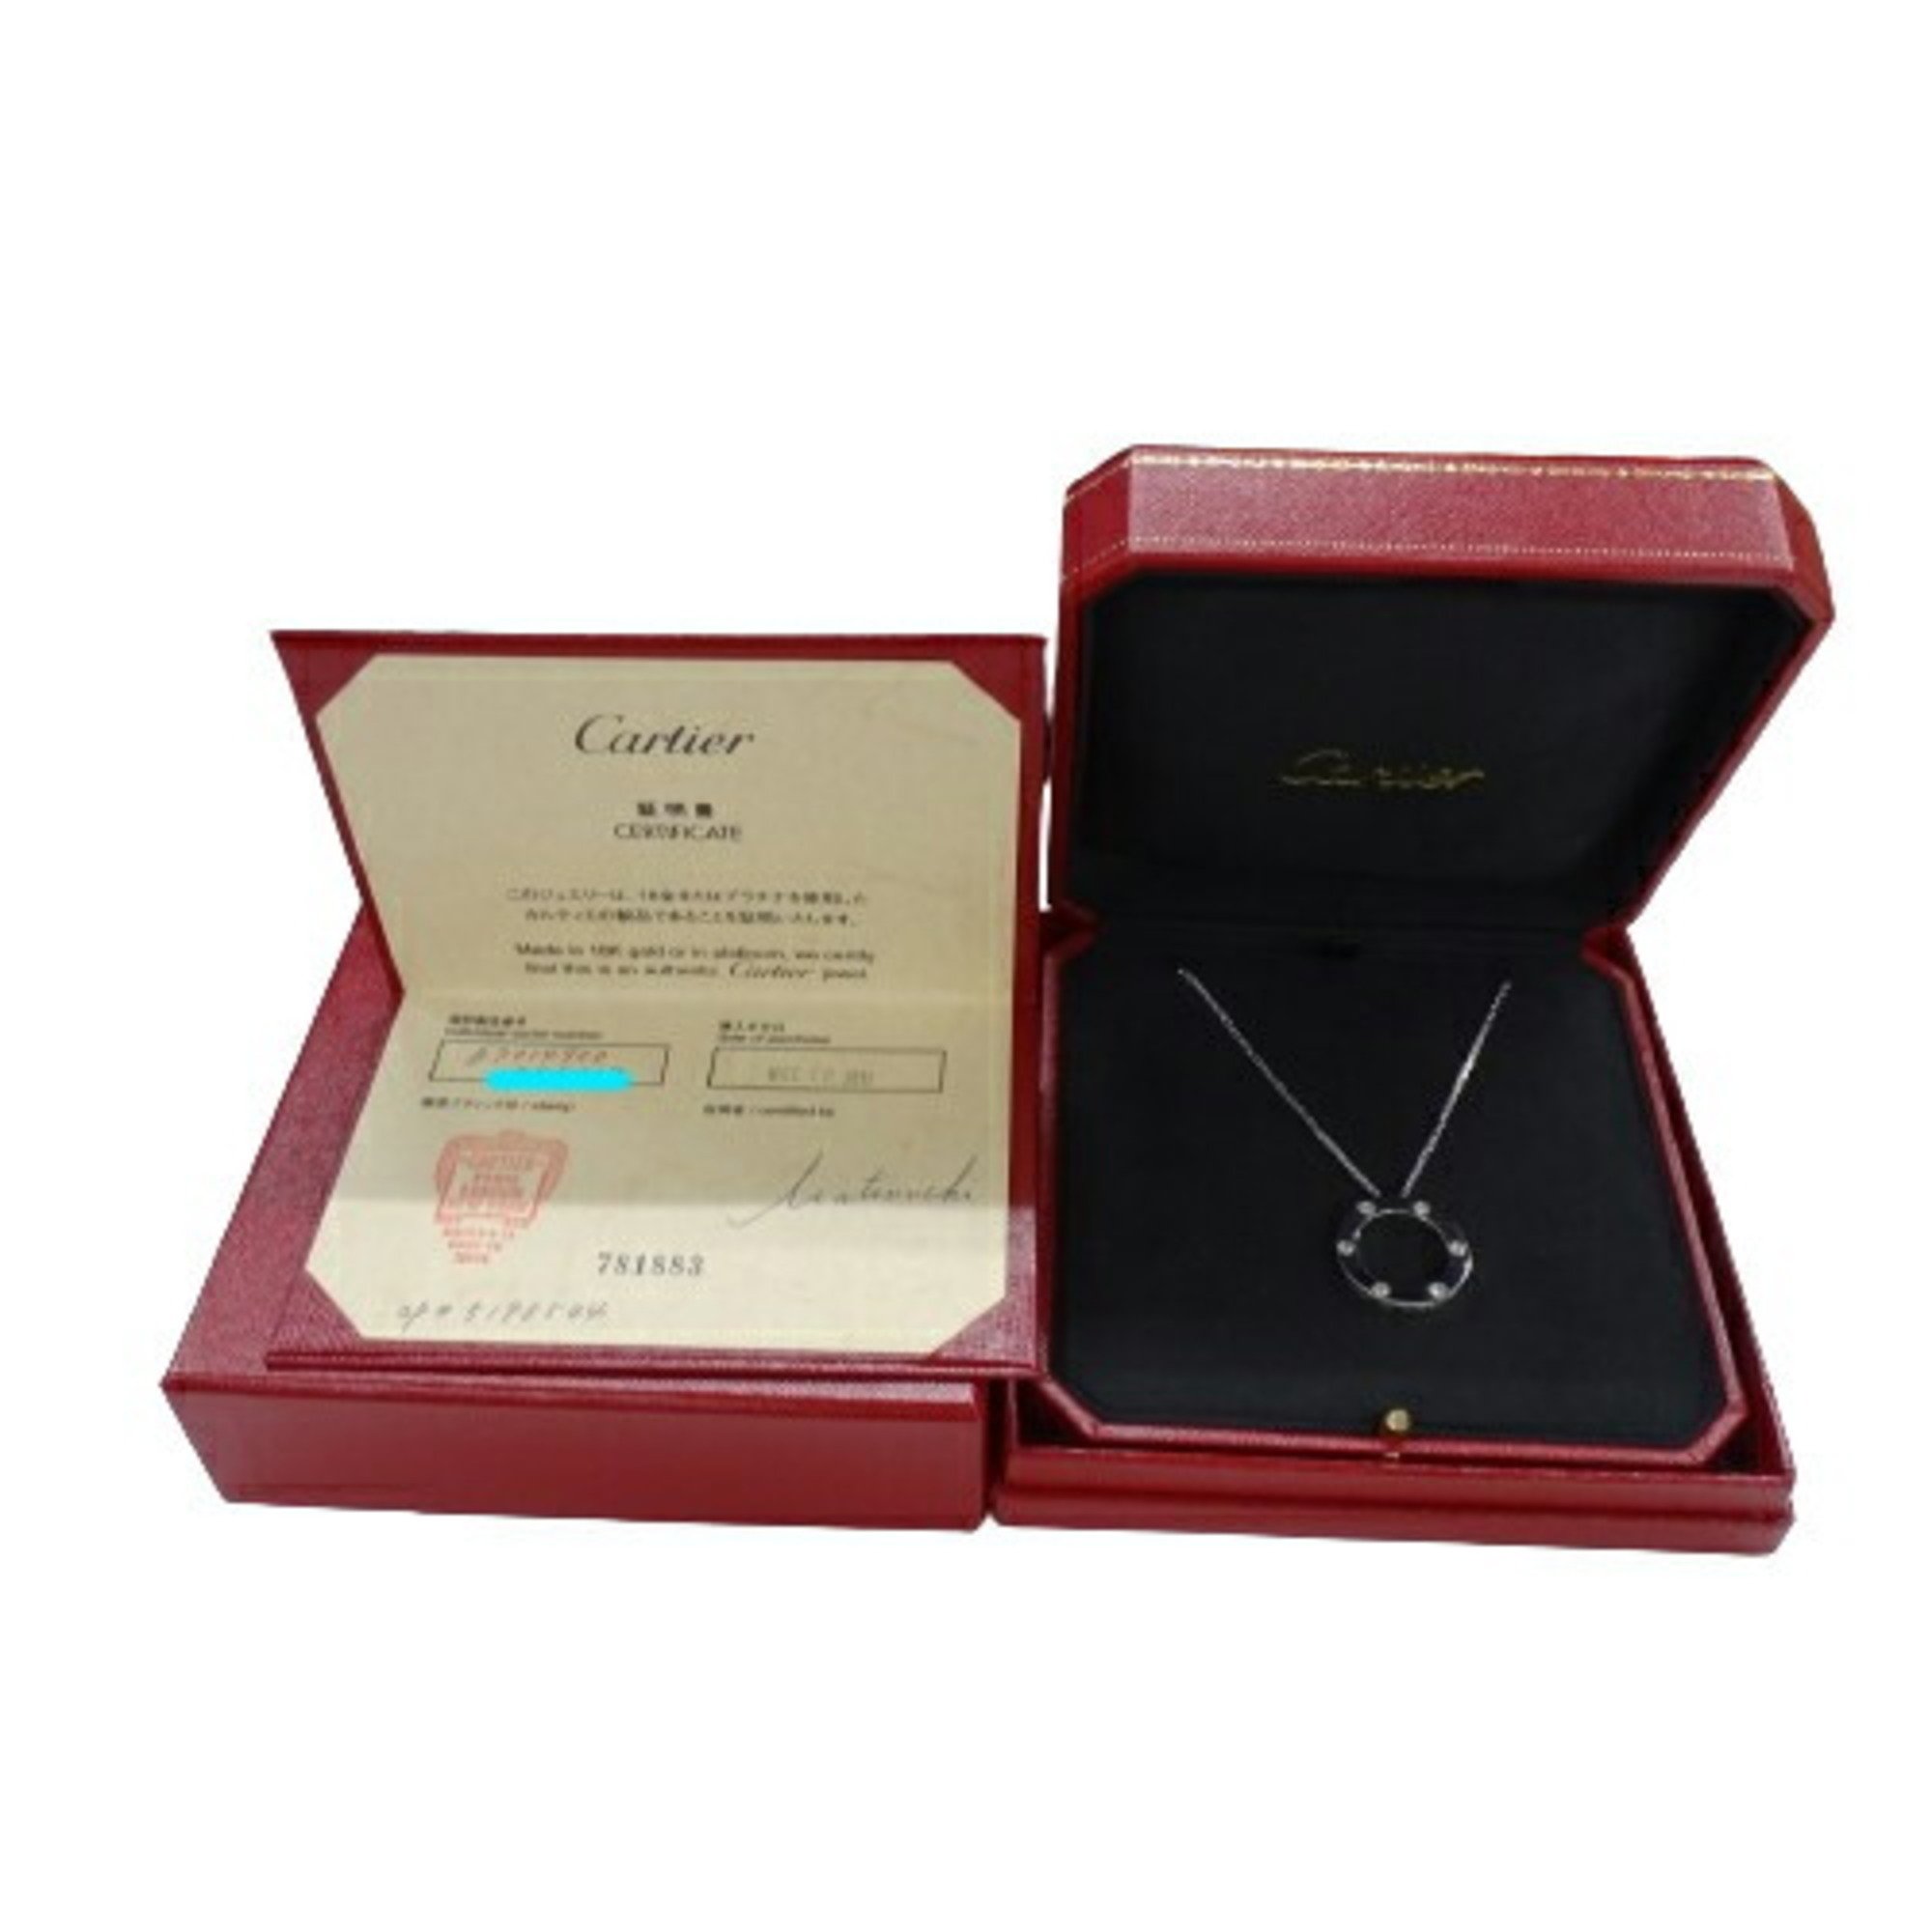 Cartier Necklace for Women 750WG 6P Diamond Love Circle LOVE White Gold B7014900 Polished